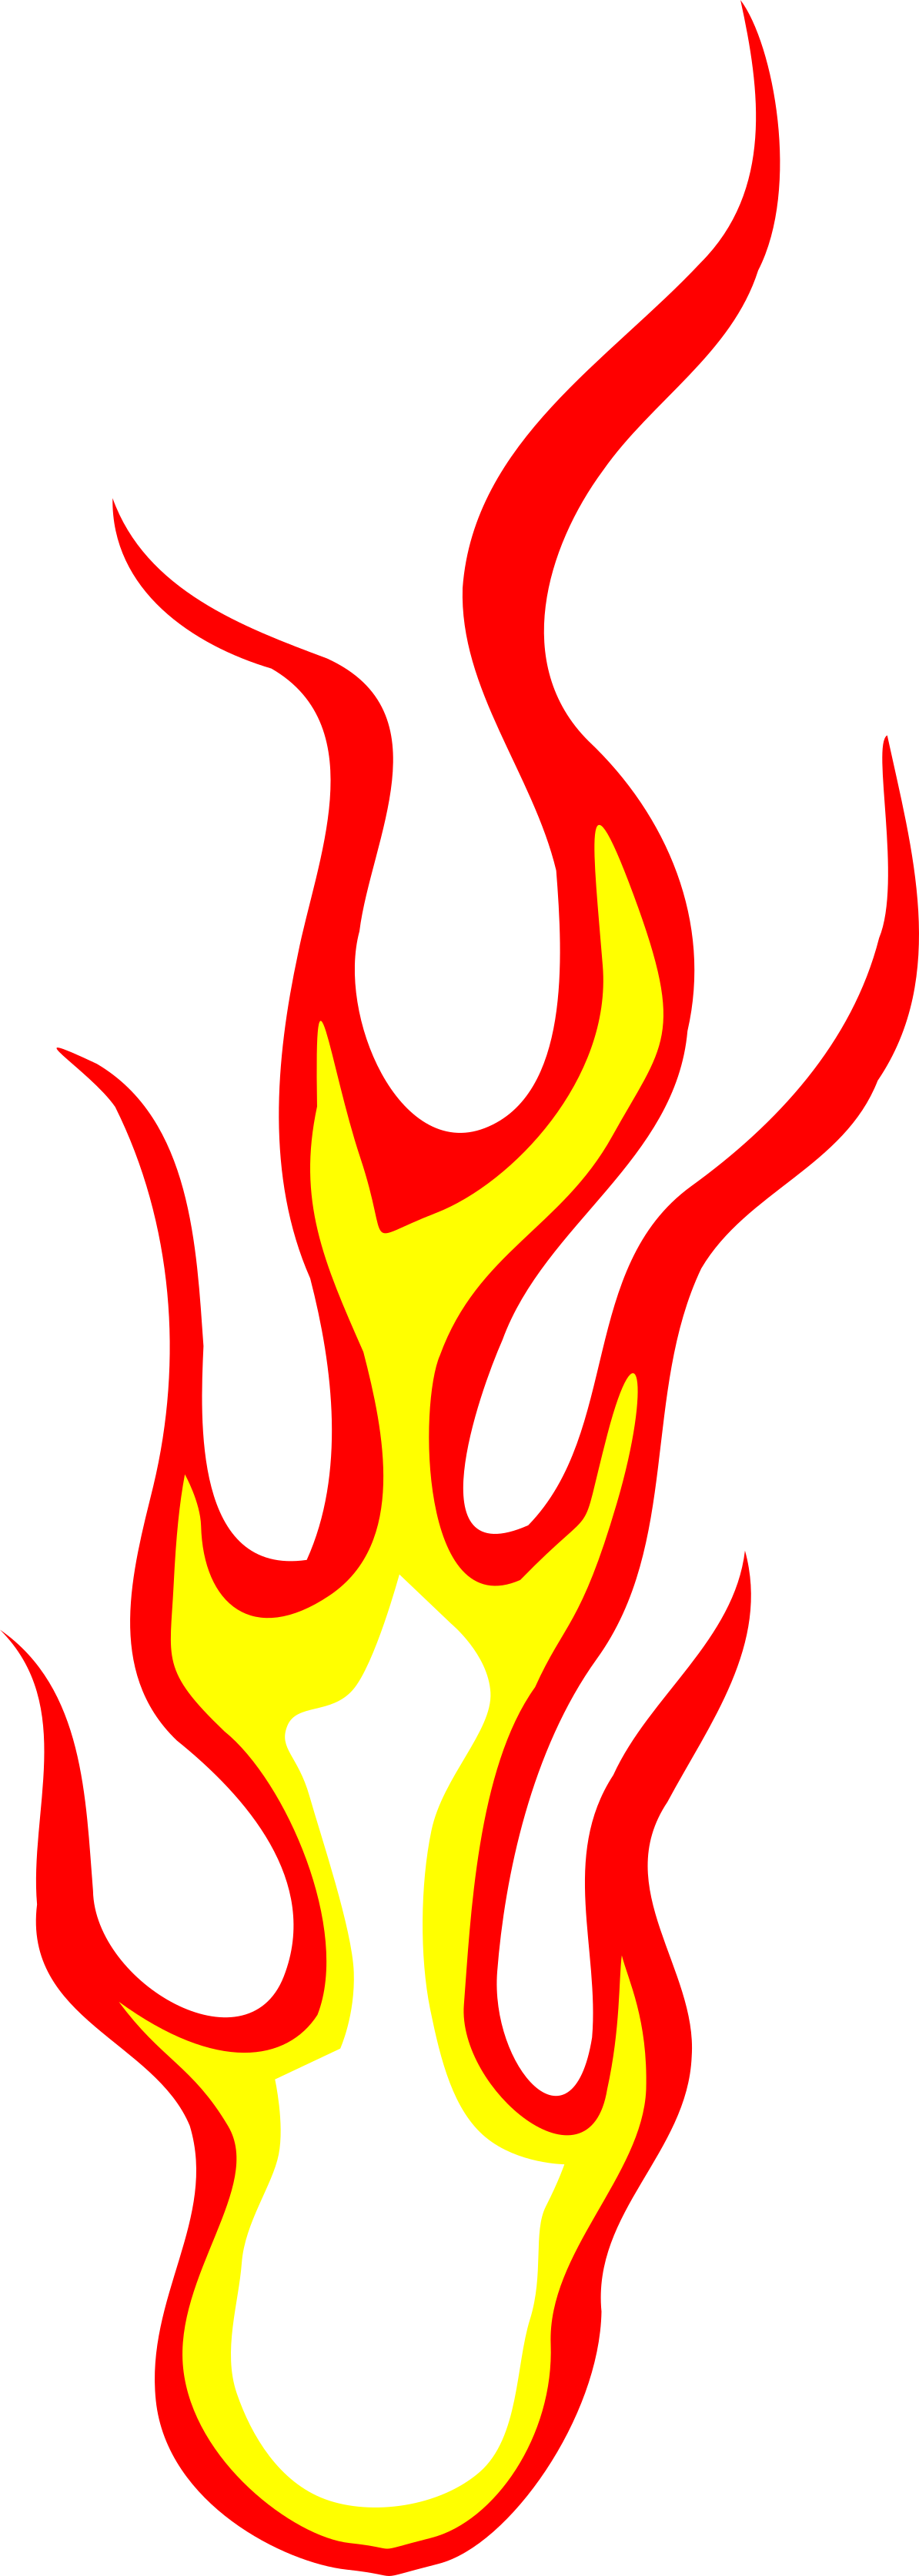 Flame clipart fire, Flame fire Transparent FREE for download on ...